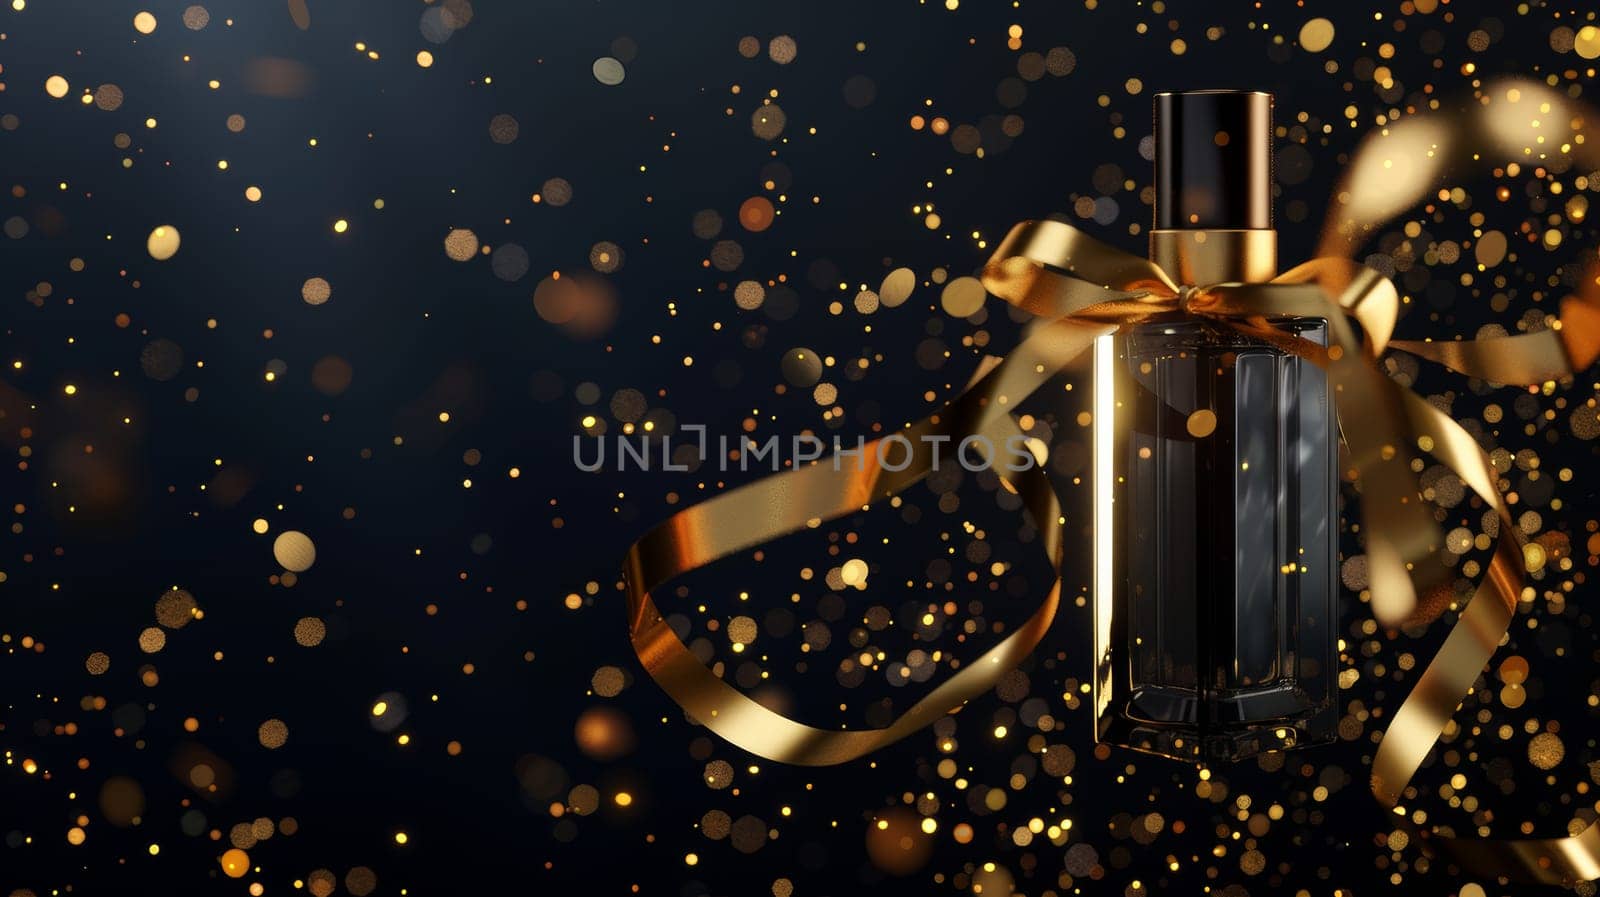 The design features a gold ribbon-wrapped perfume bottle on a black background with confetti and glowing sparkles. Female fragrance cosmetics and promo posters. 3D modern modern ad banner. by Andrei_01